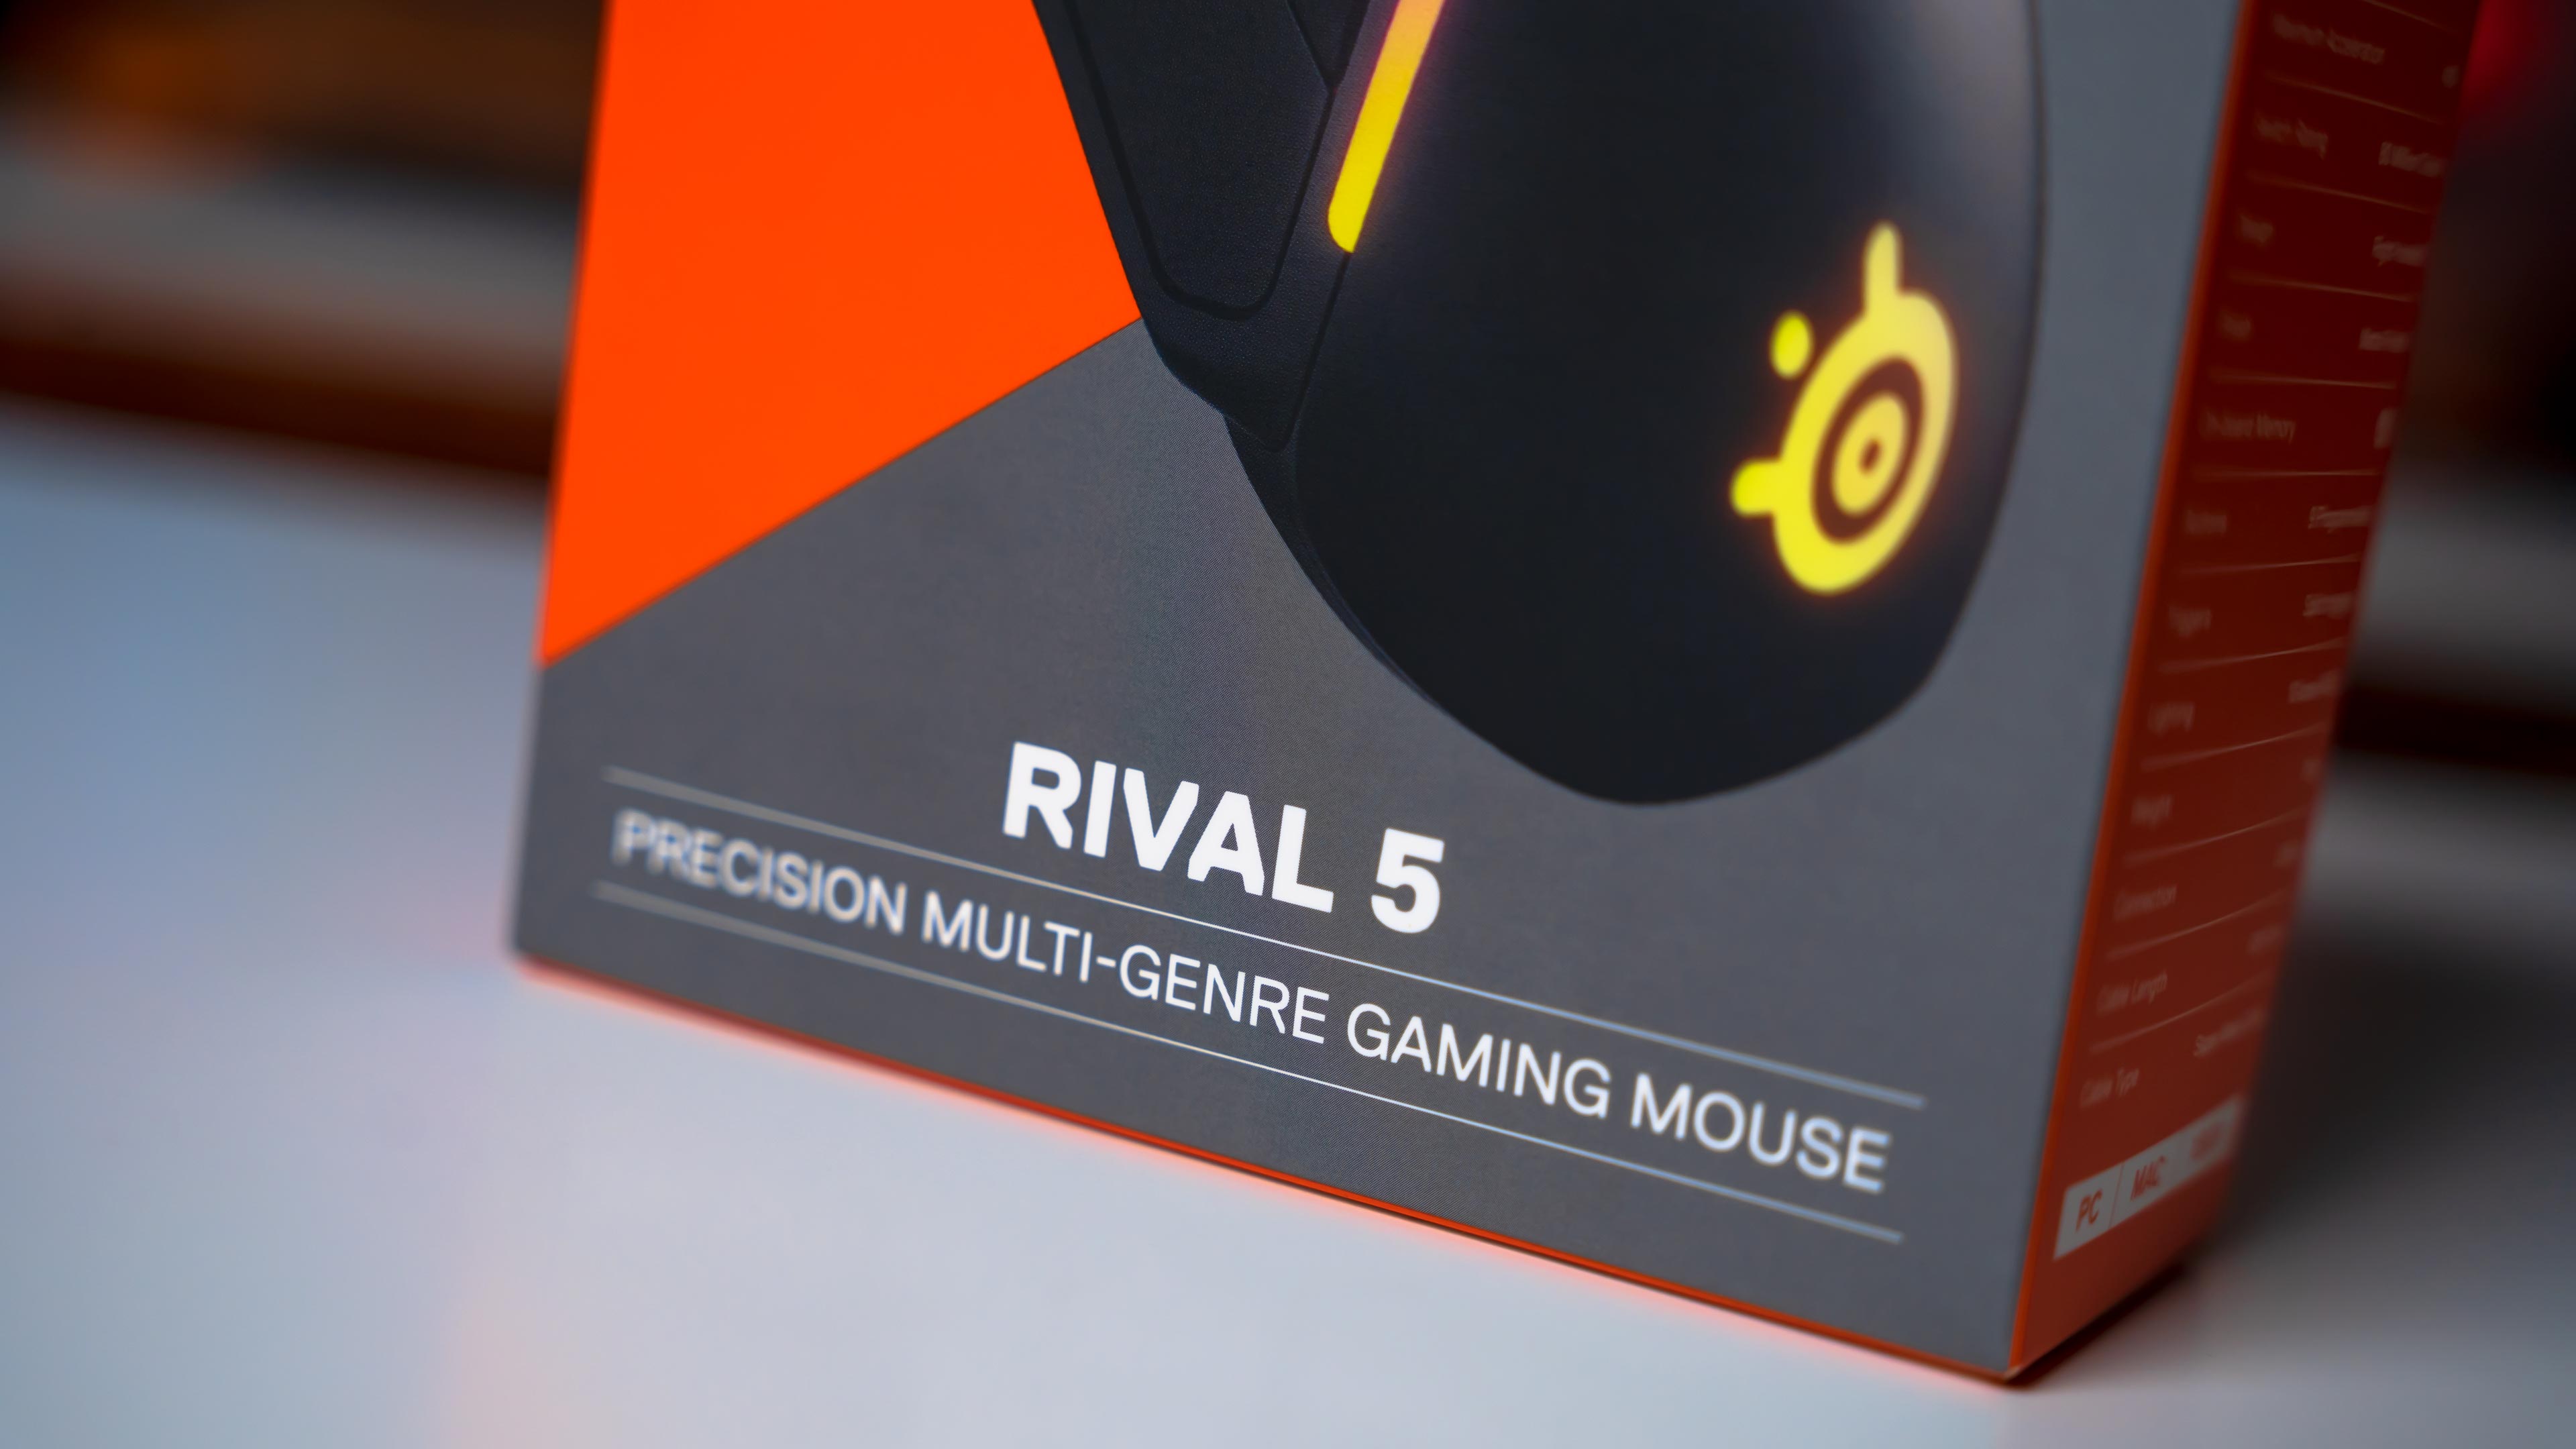 Steelseries Rival 5 Box (9)